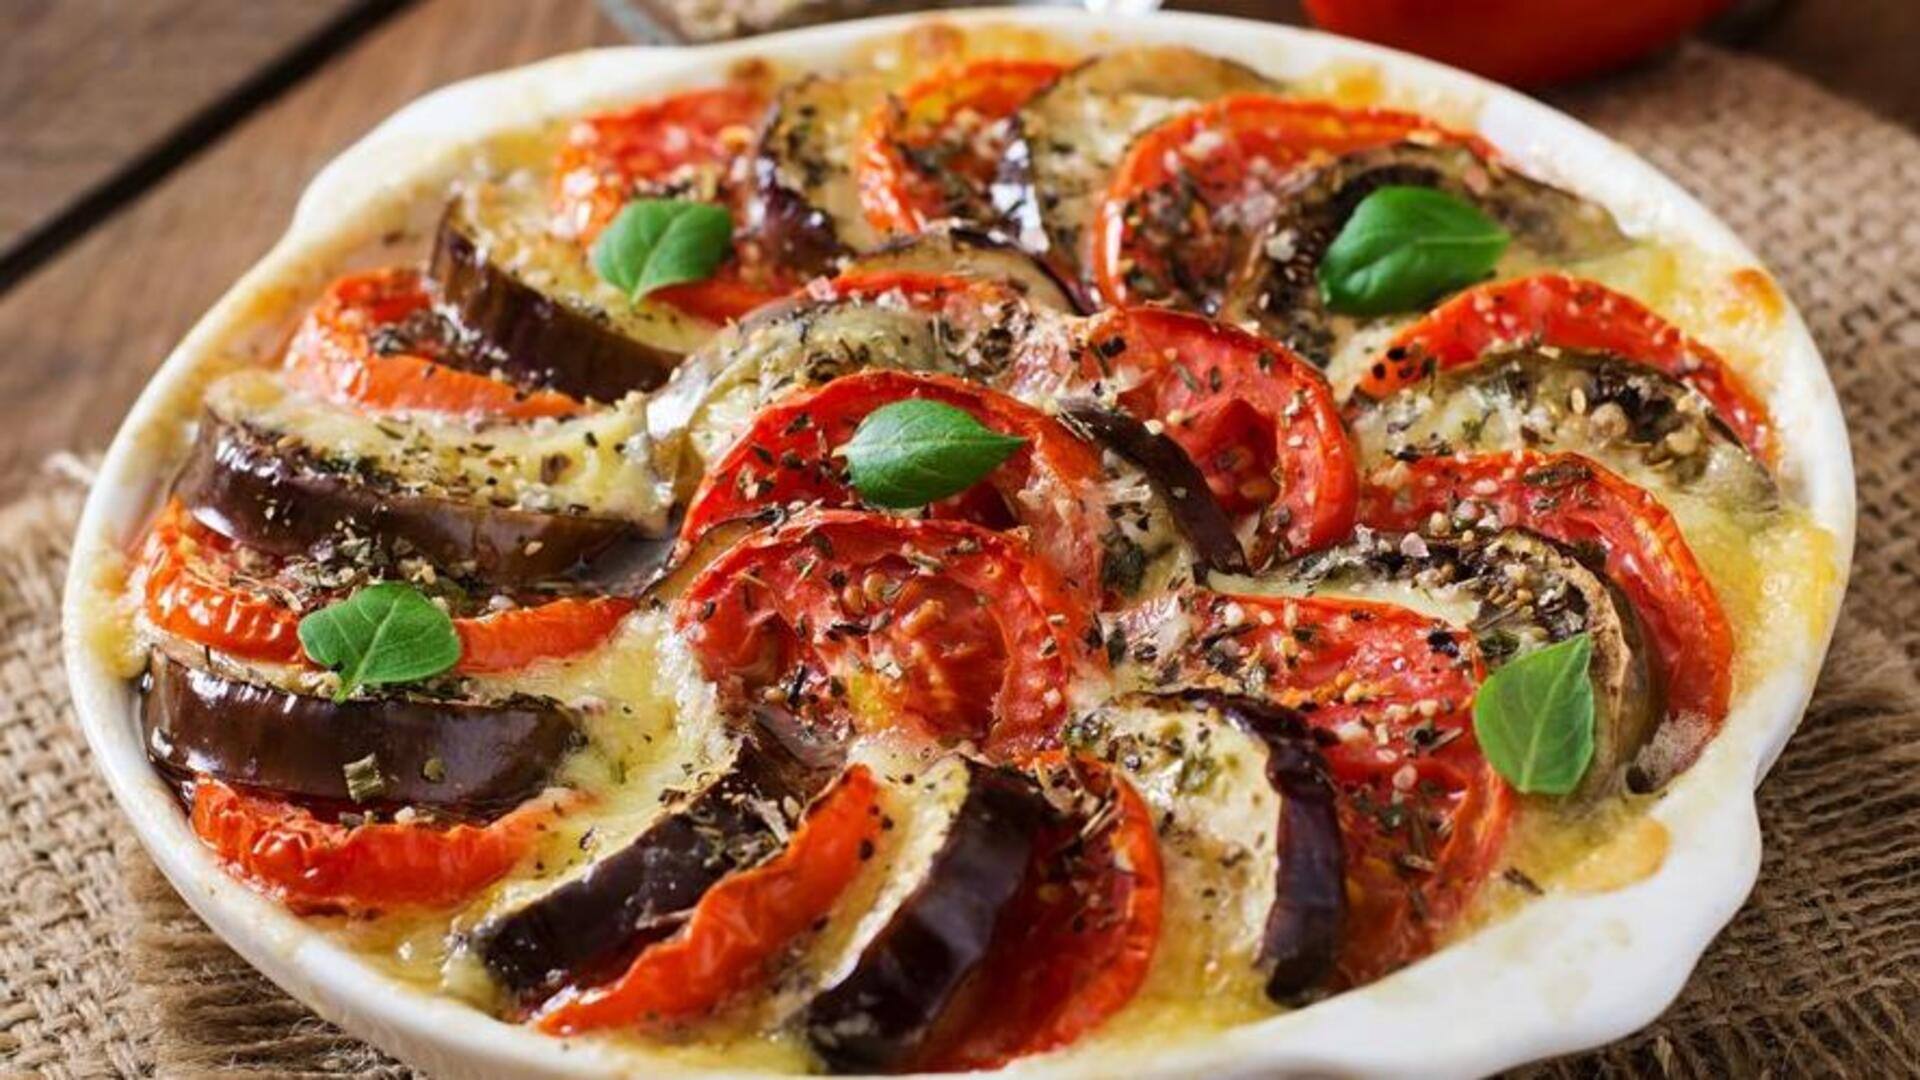 Recipe: Cook this eggless French ratatouille tart at home